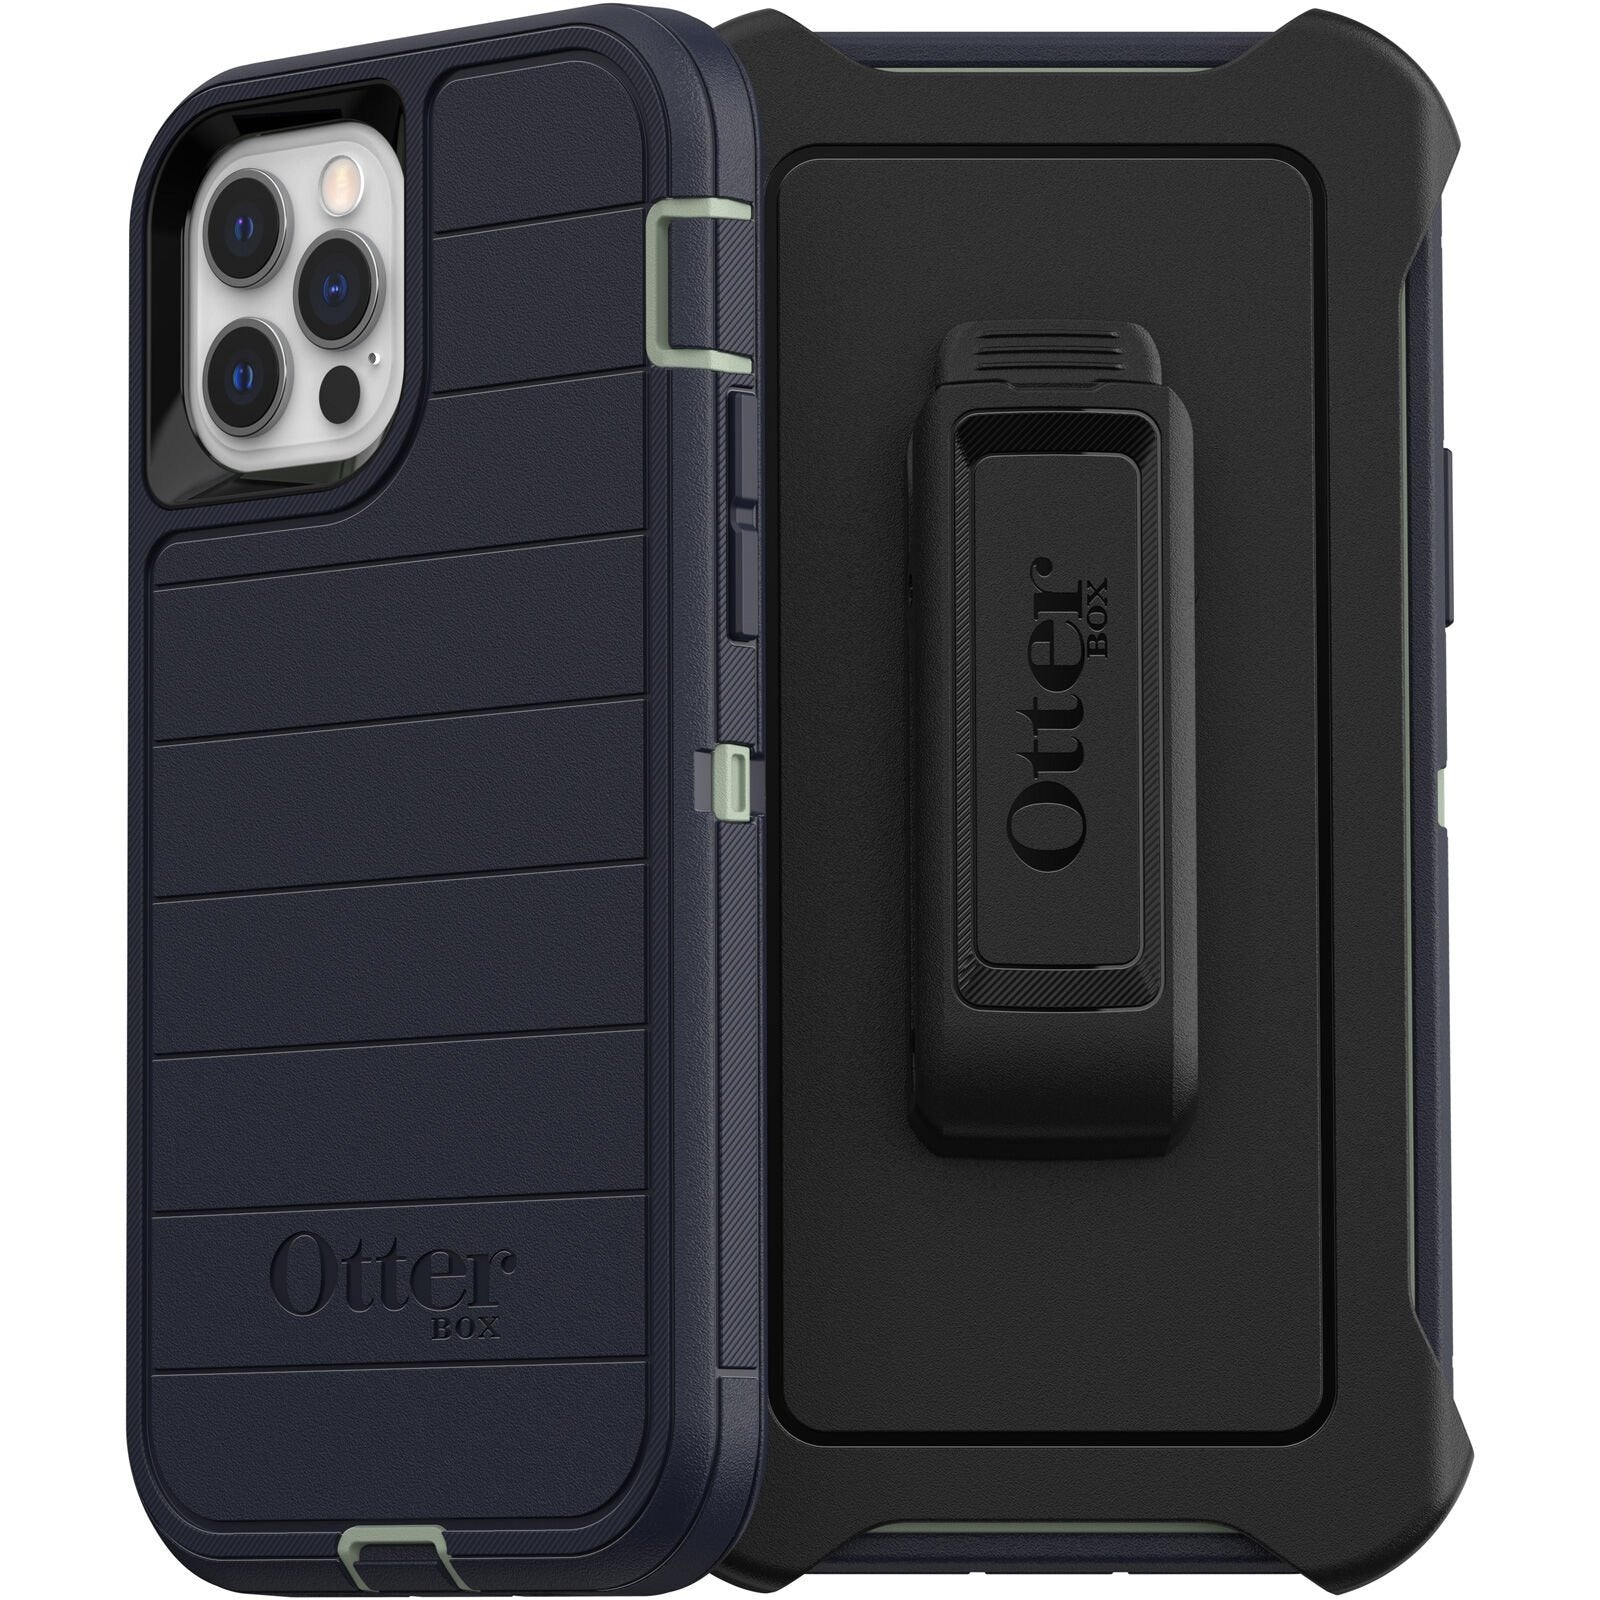 OtterBox DEFENDER SERIES Case &amp; Holster for Apple iPhone 12/12 Pro - Varsity Blues (Certified Refurbished)